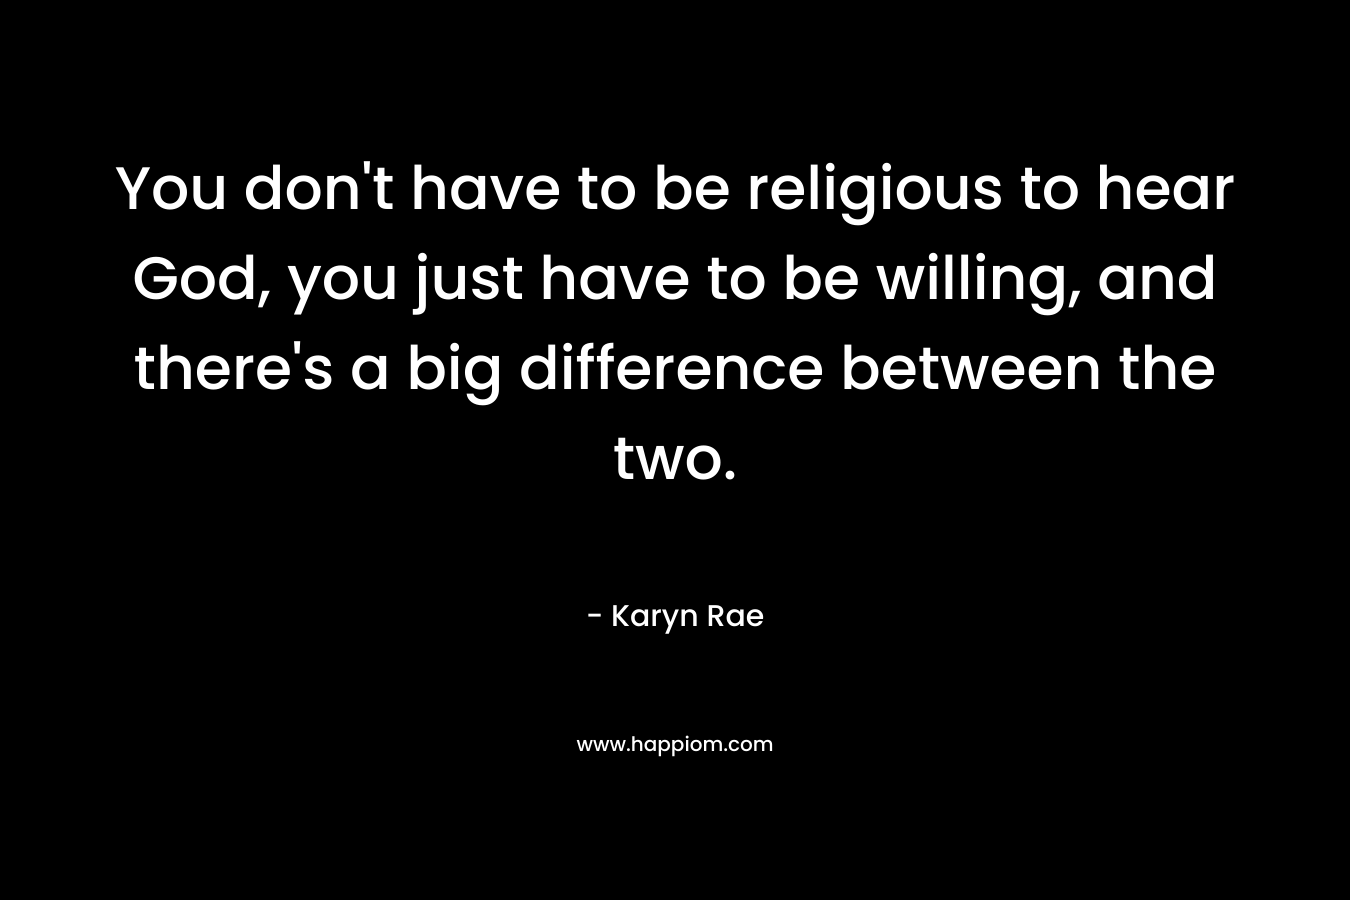 You don’t have to be religious to hear God, you just have to be willing, and there’s a big difference between the two. – Karyn Rae